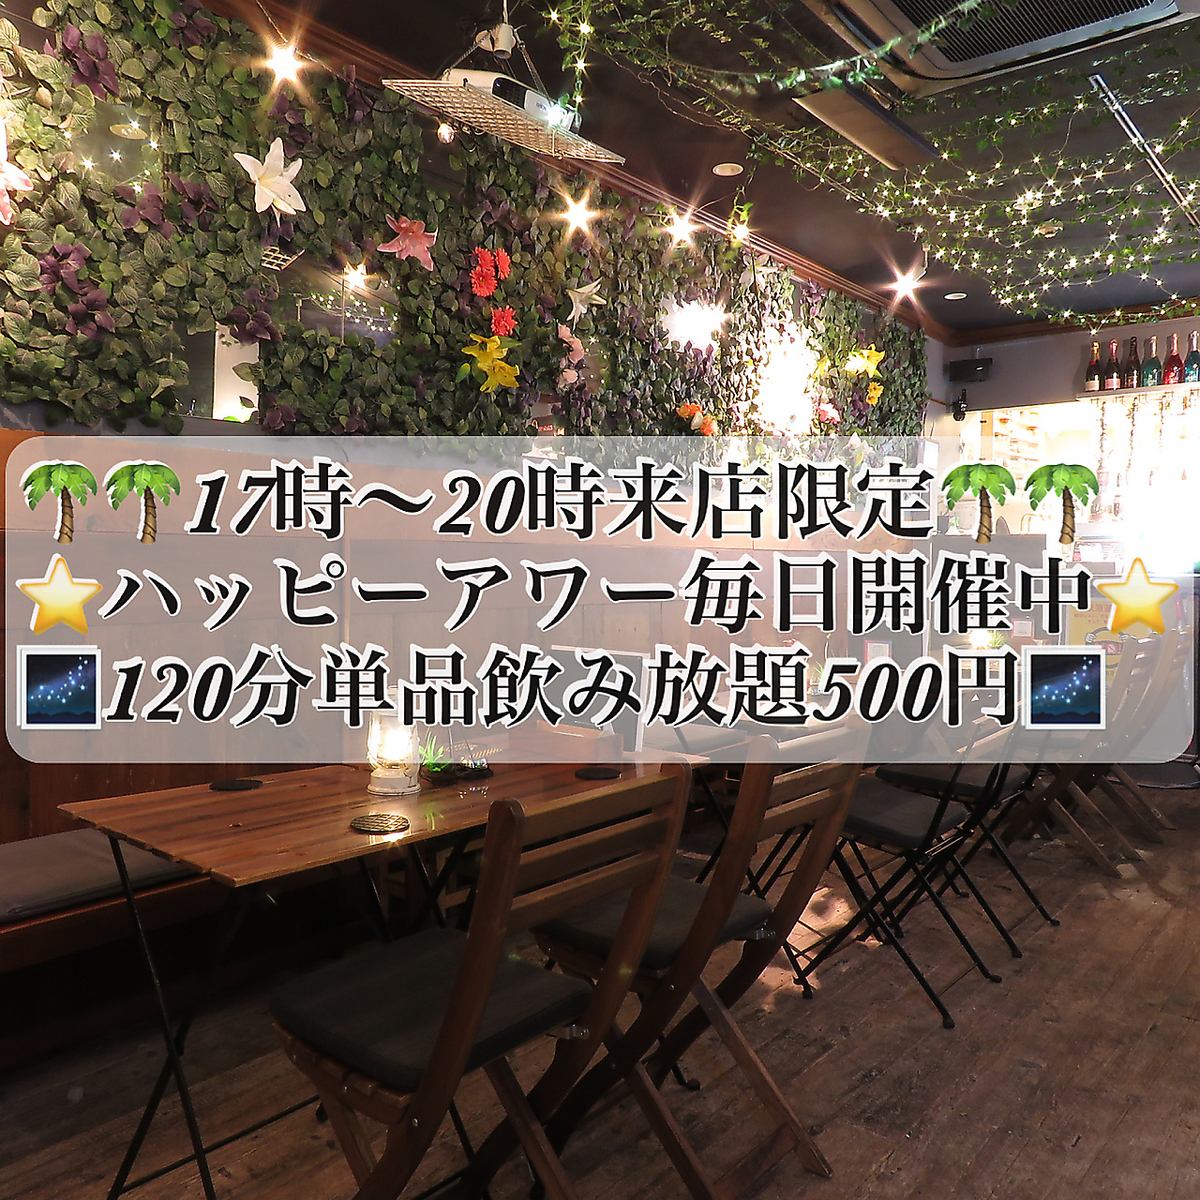 ★Limited to visitors from 17:00 to 20:00★All-you-can-drink for 500 yen for 120 minutes!Draft beer is also OK!